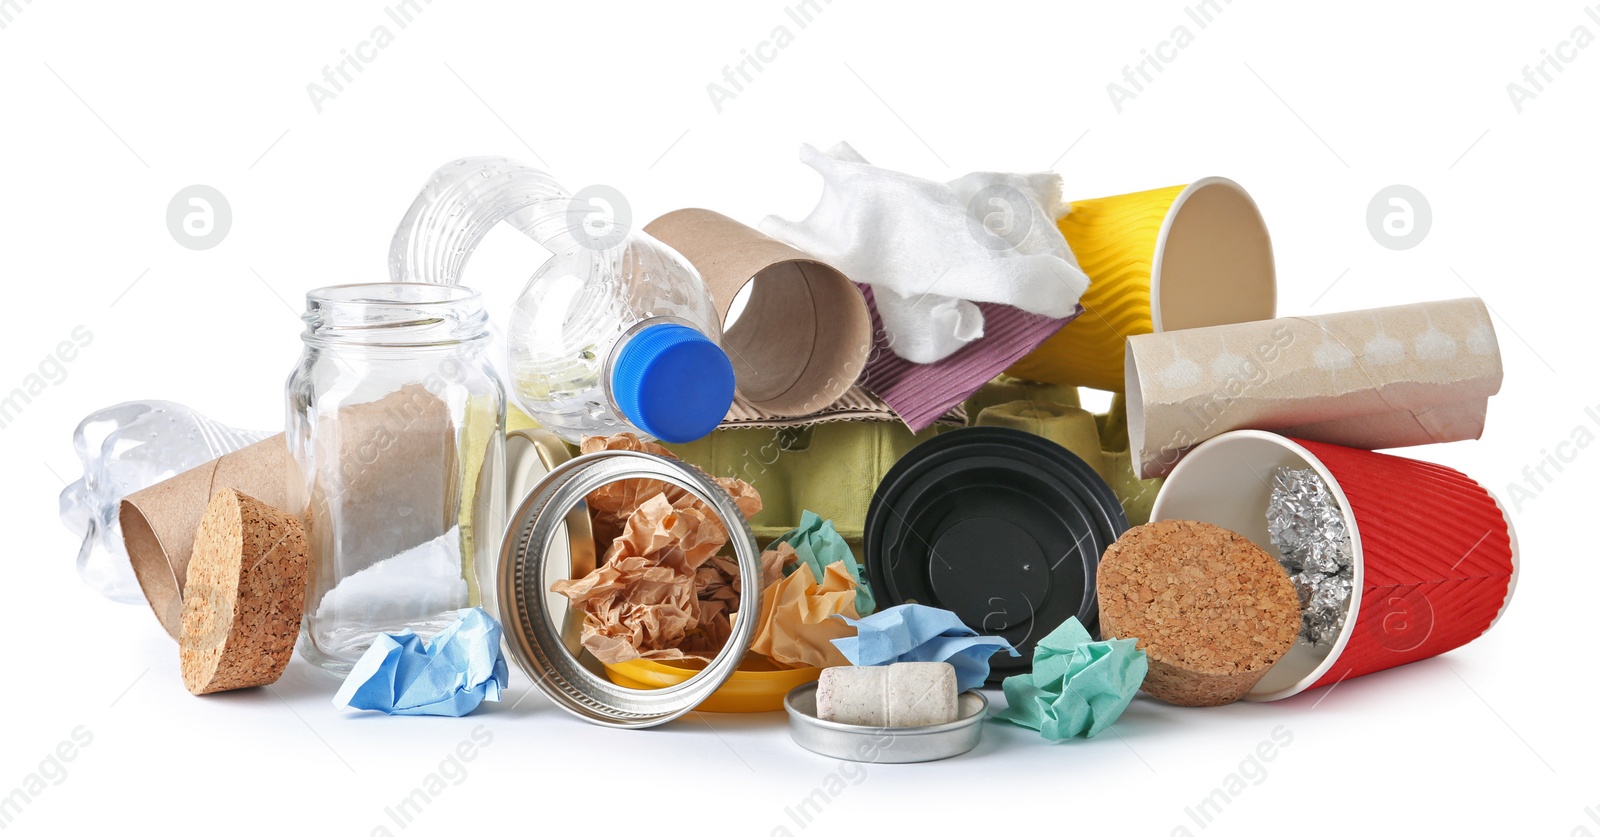 Photo of Pile of different garbage on white background. Trash recycling